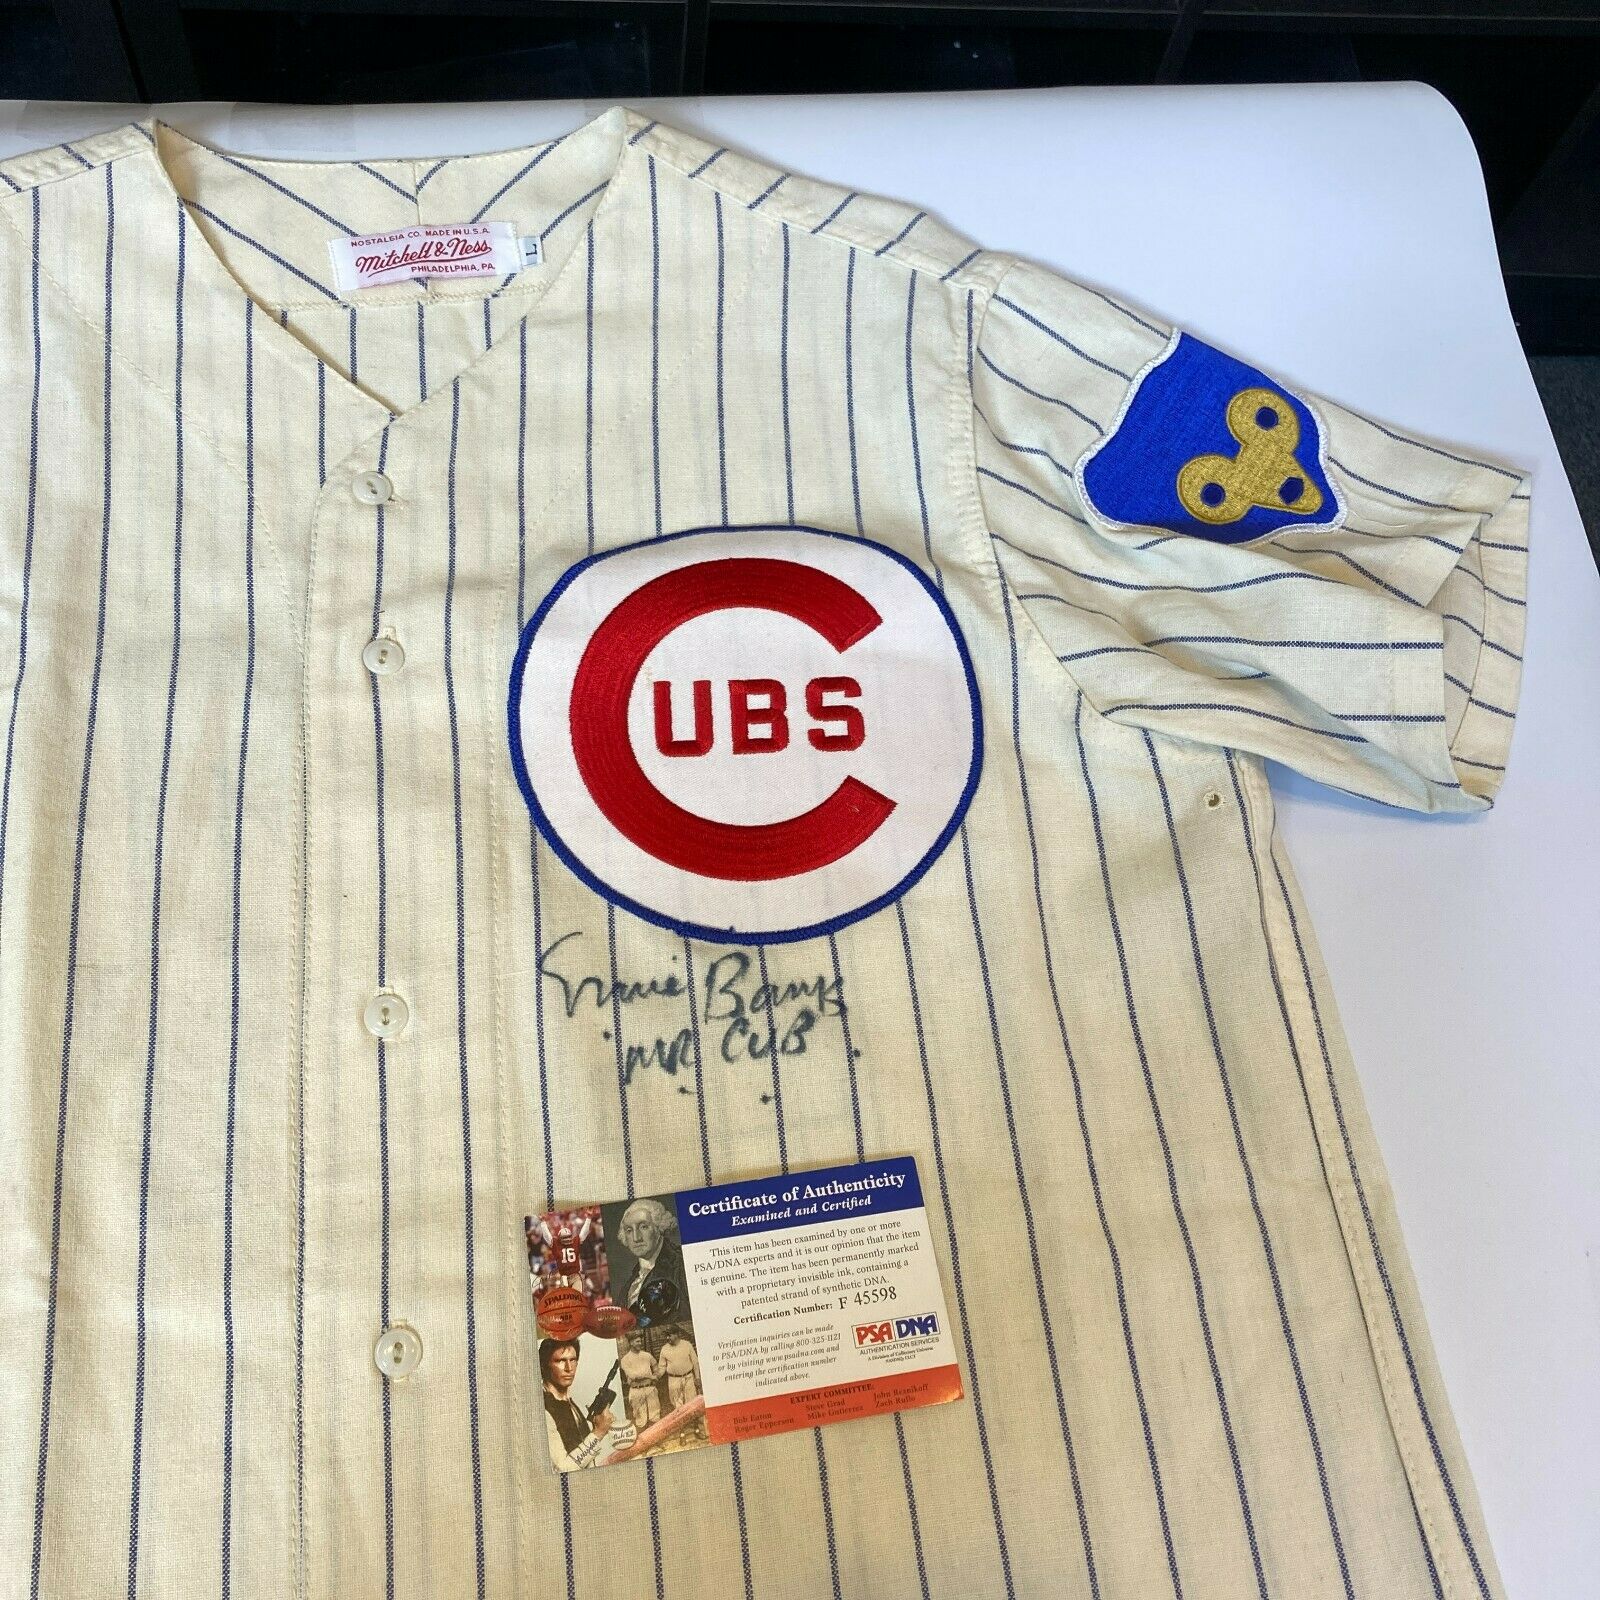 1969 Ernie Banks Signed, Game-Worn Chicago Cubs Jersey Could Set